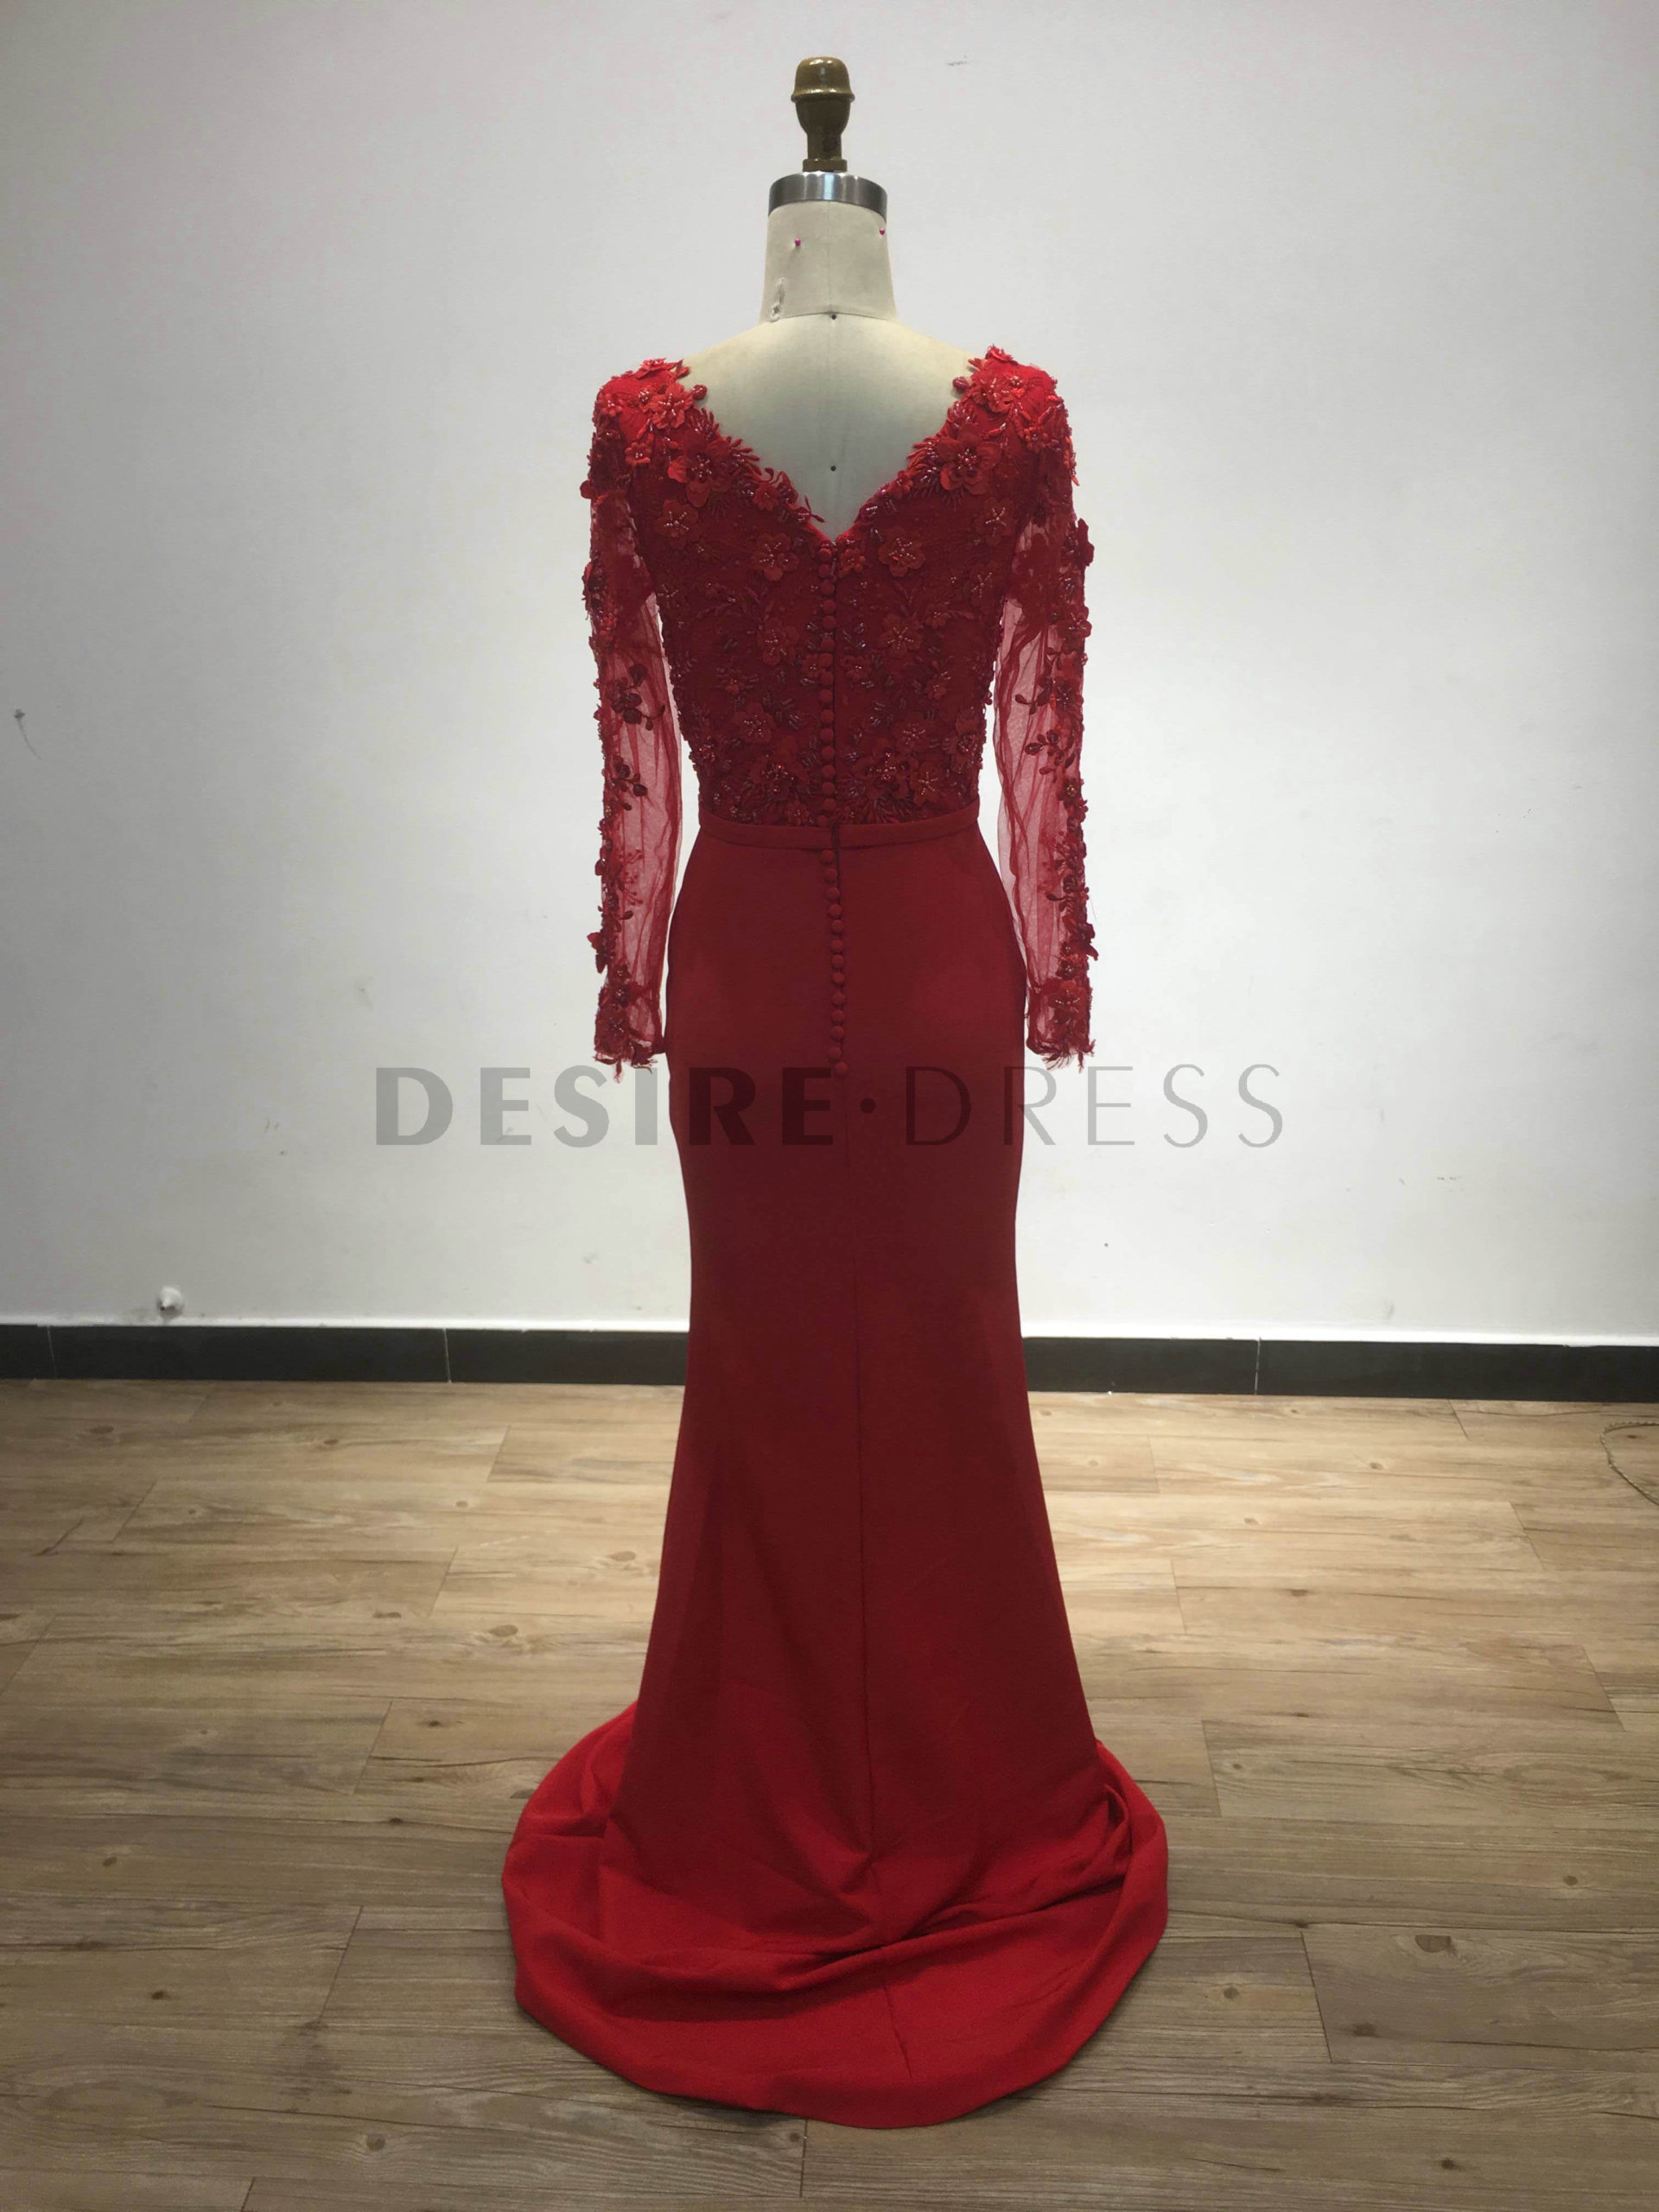 Beautiful-Red-V-Neck-Lace-Appliqued-Bodice-Mermaid-Dress-DYL023-2